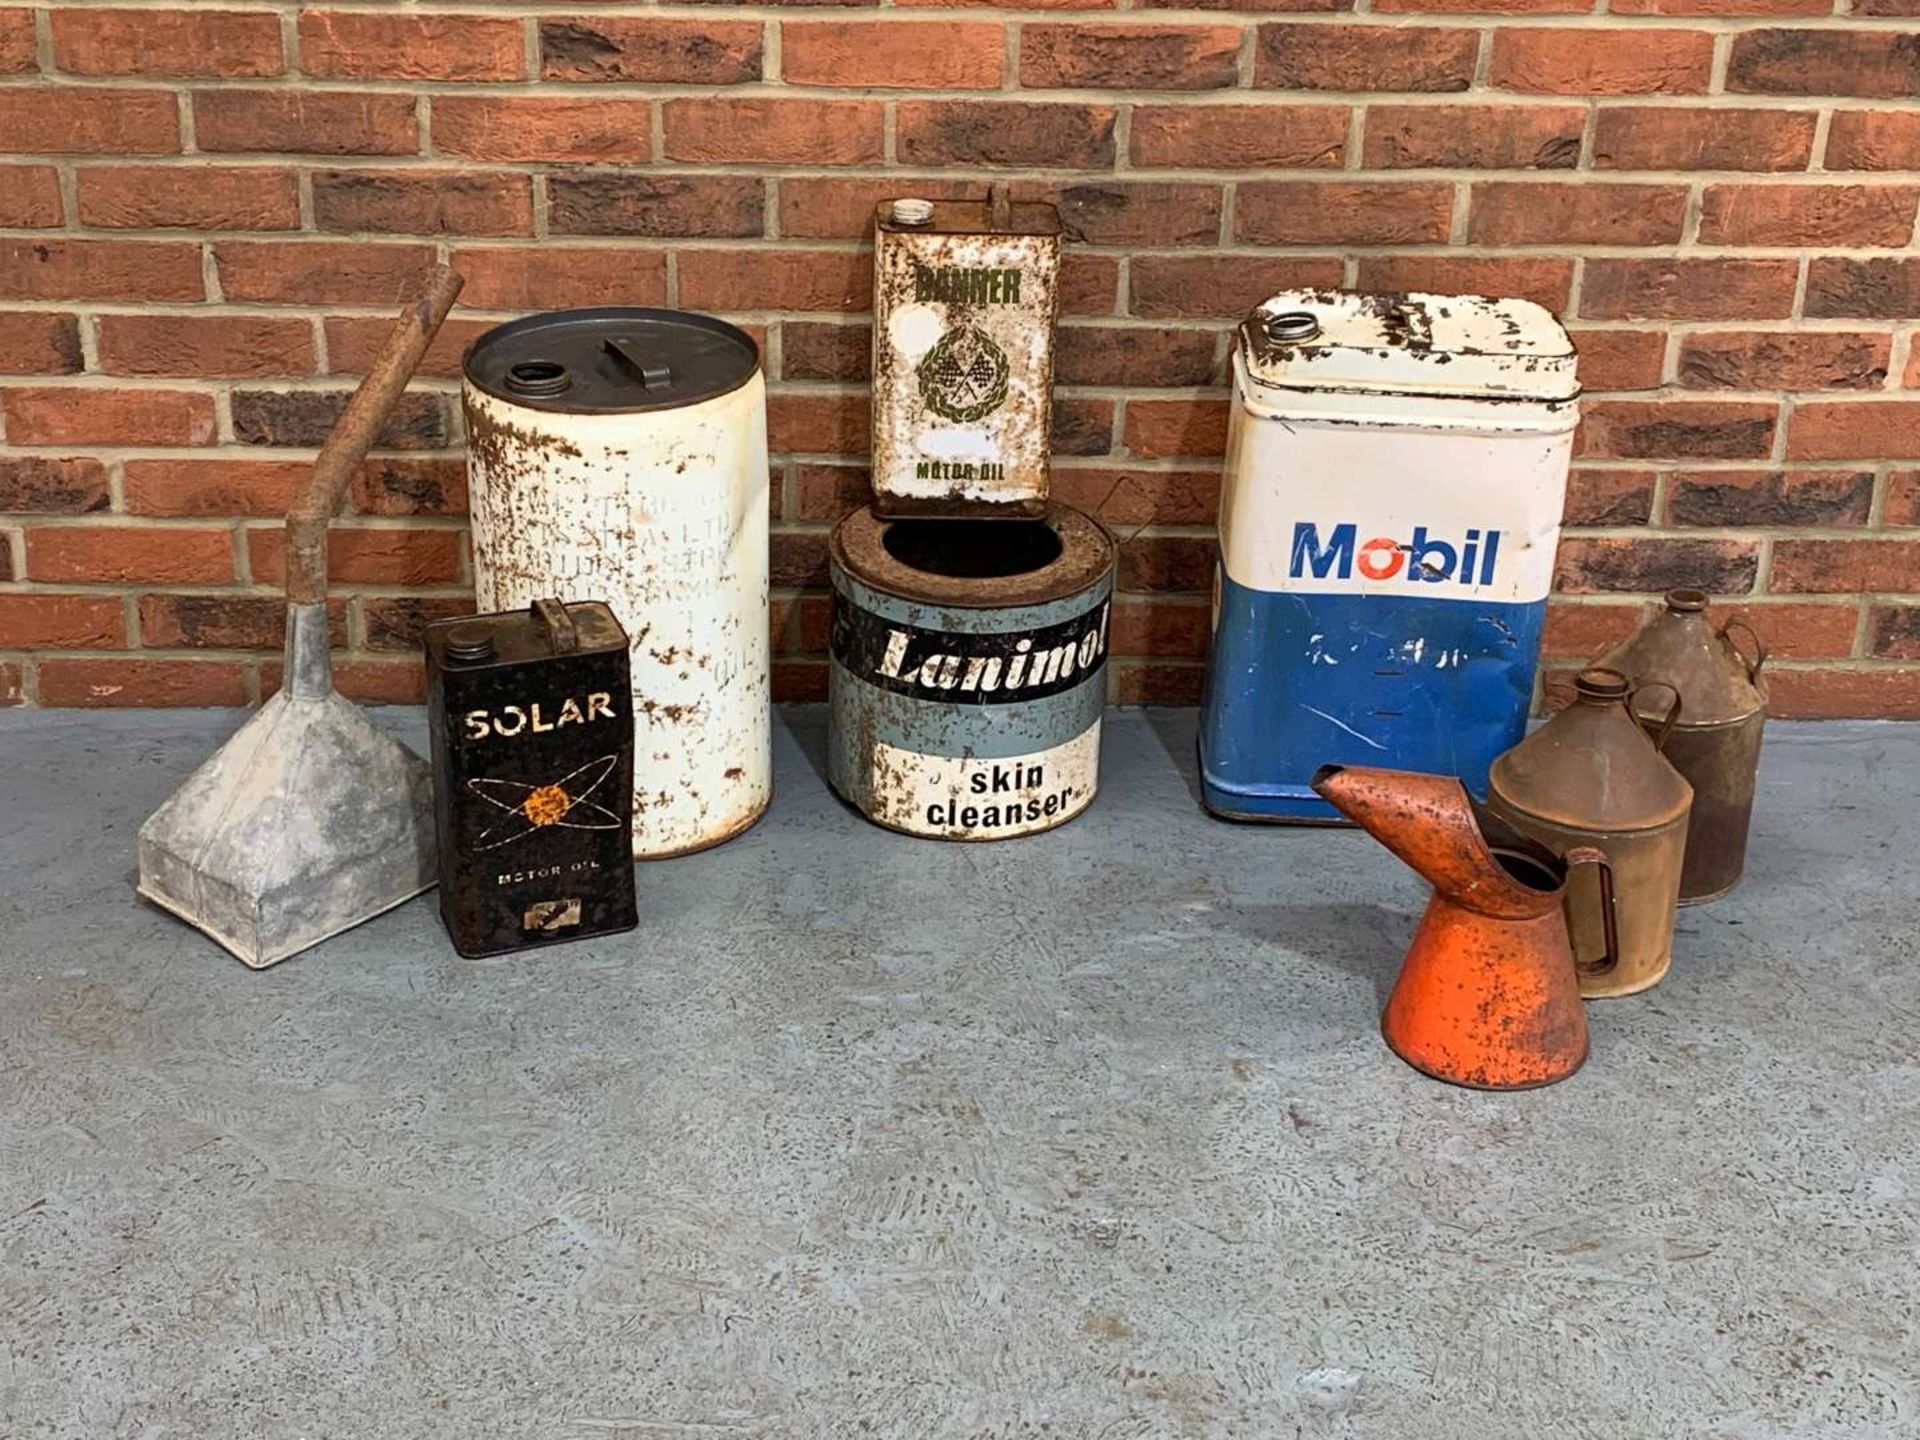 Mixed Lot of Vintage Cans